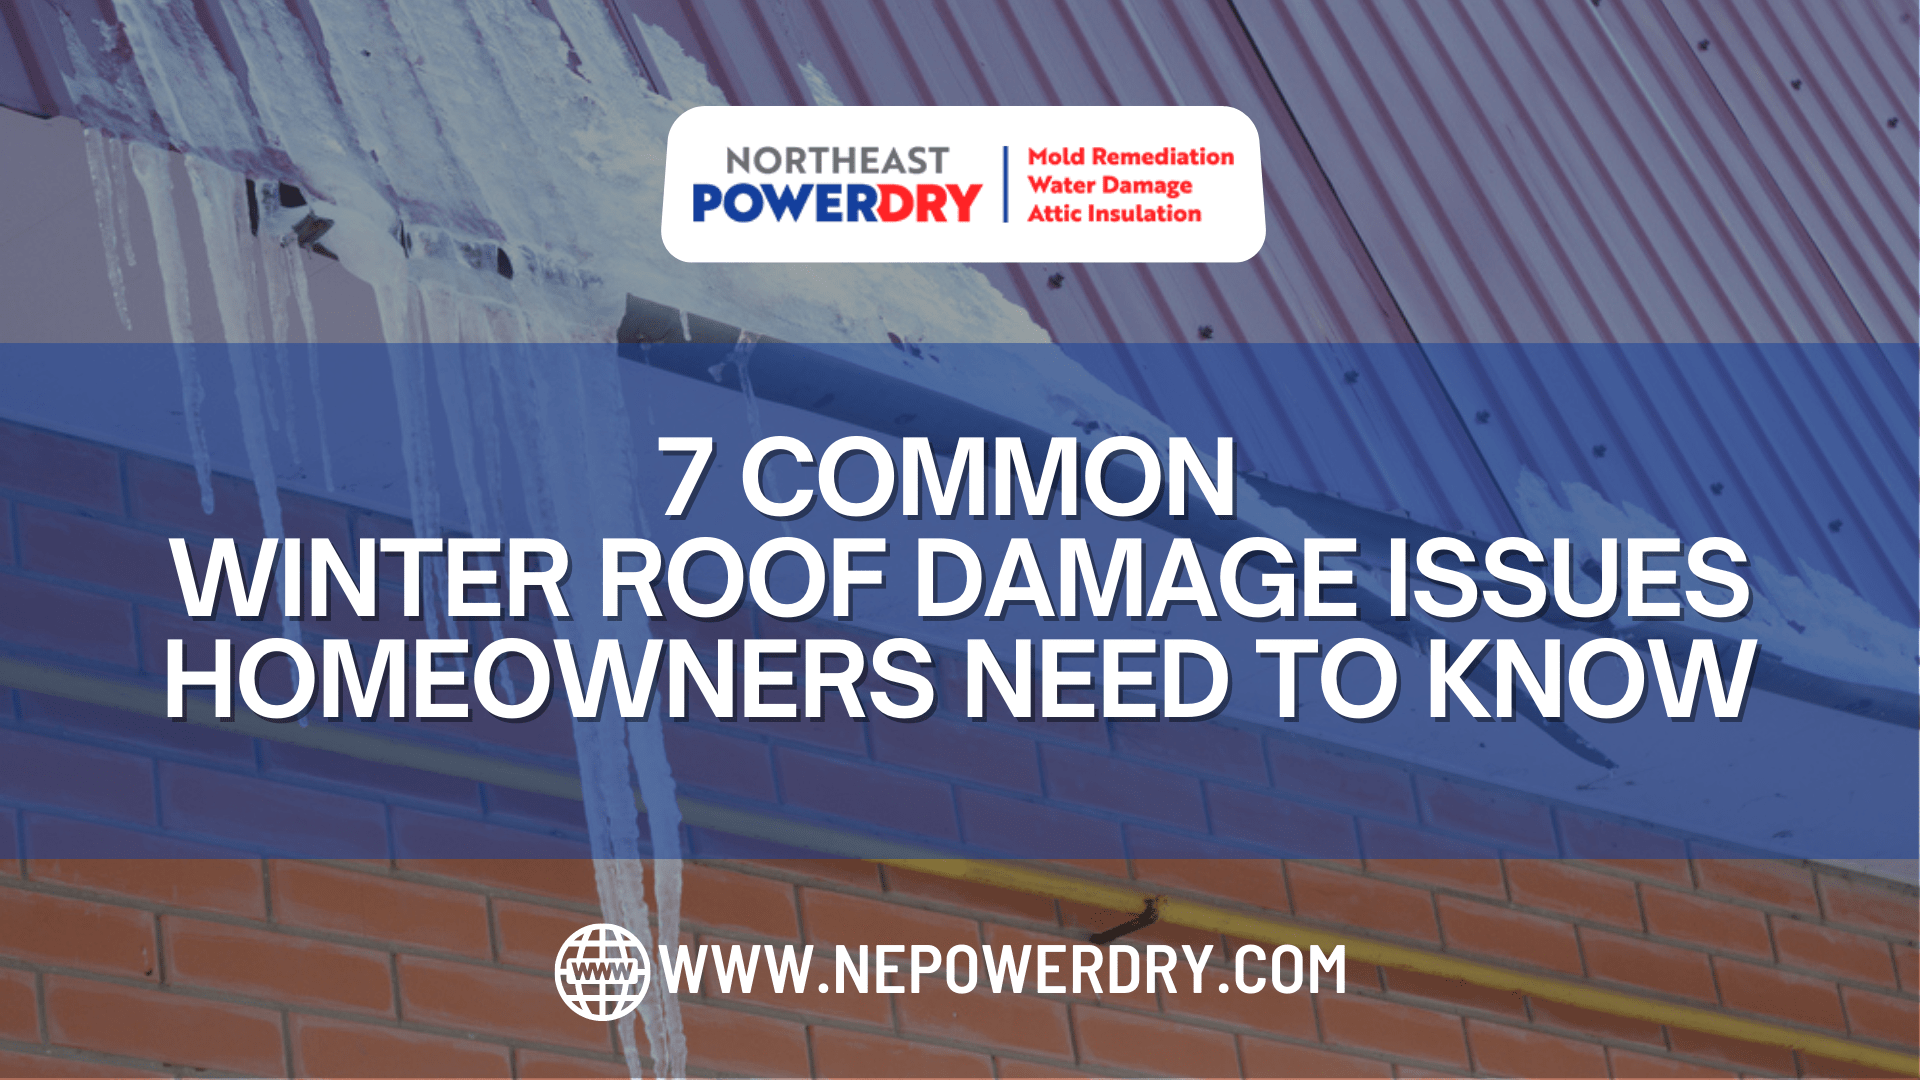 7 Common Winter Roof Damage Issues Homeowners Need to Know